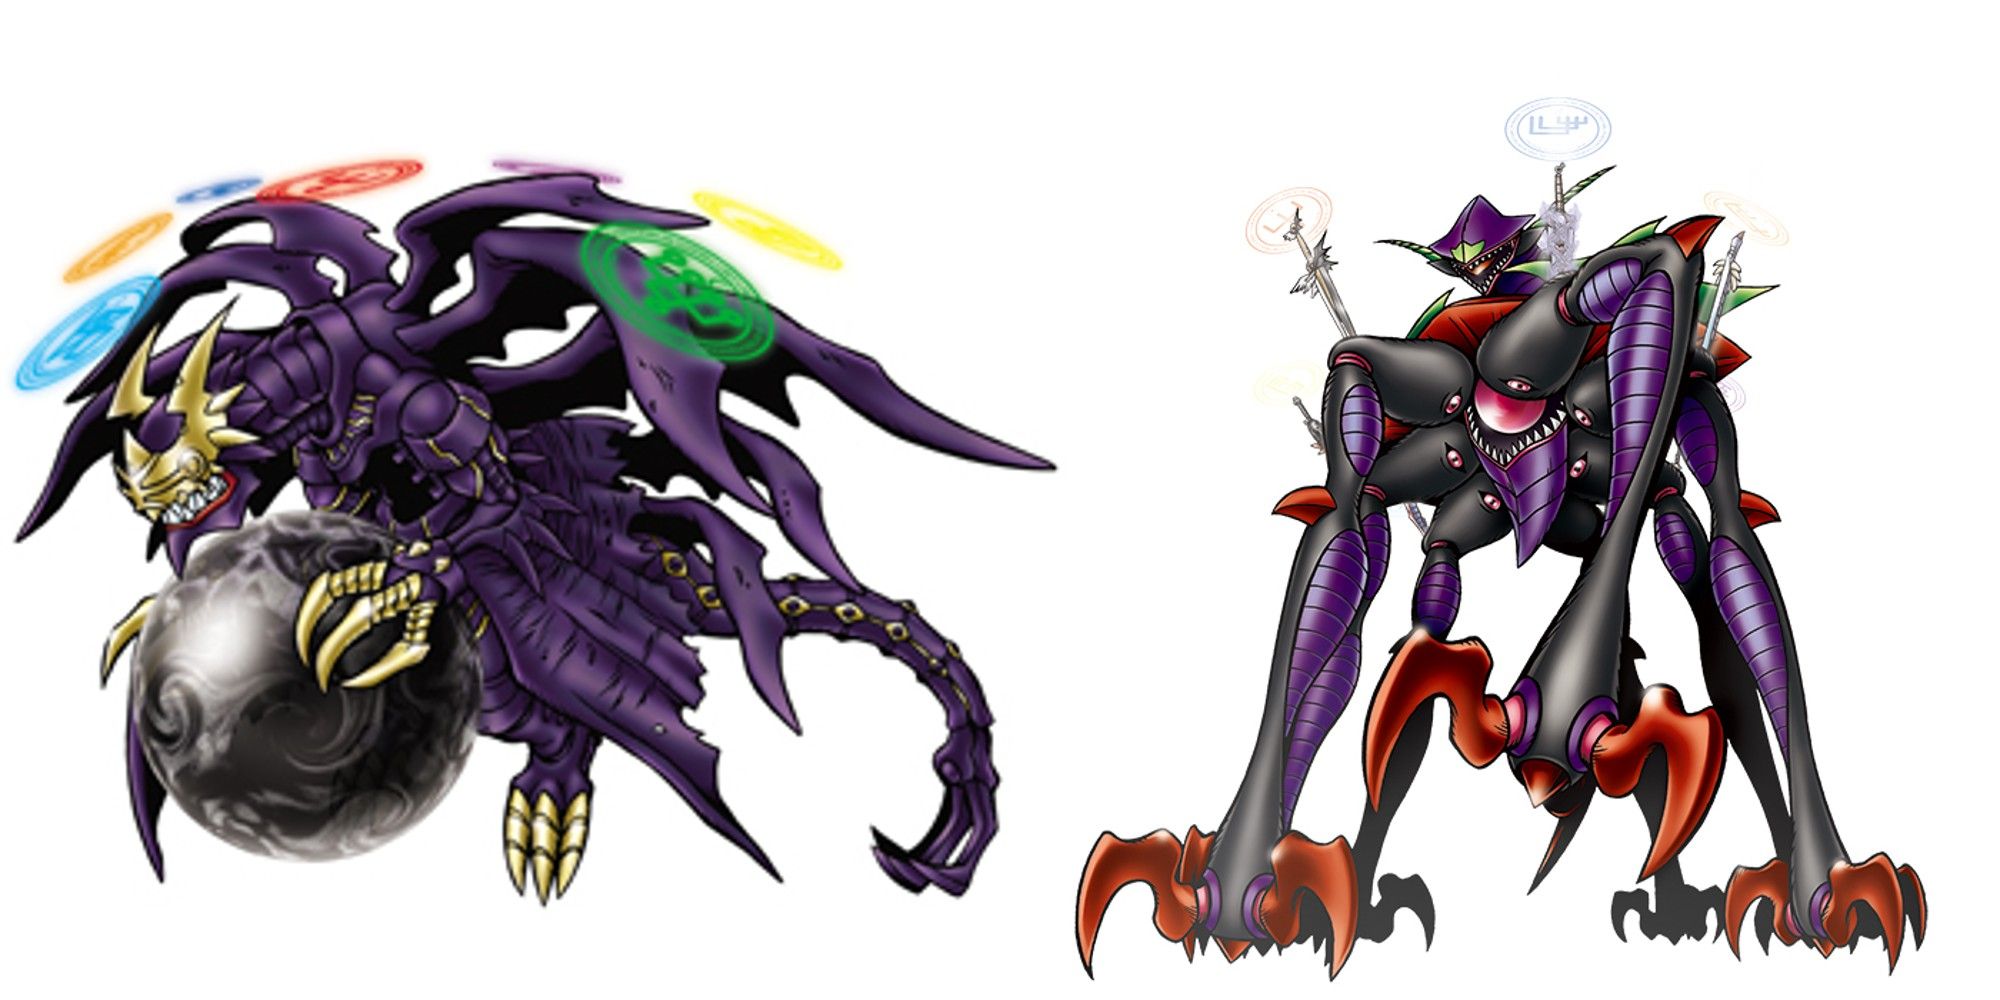 Digimon: The Two Super Demon Lords